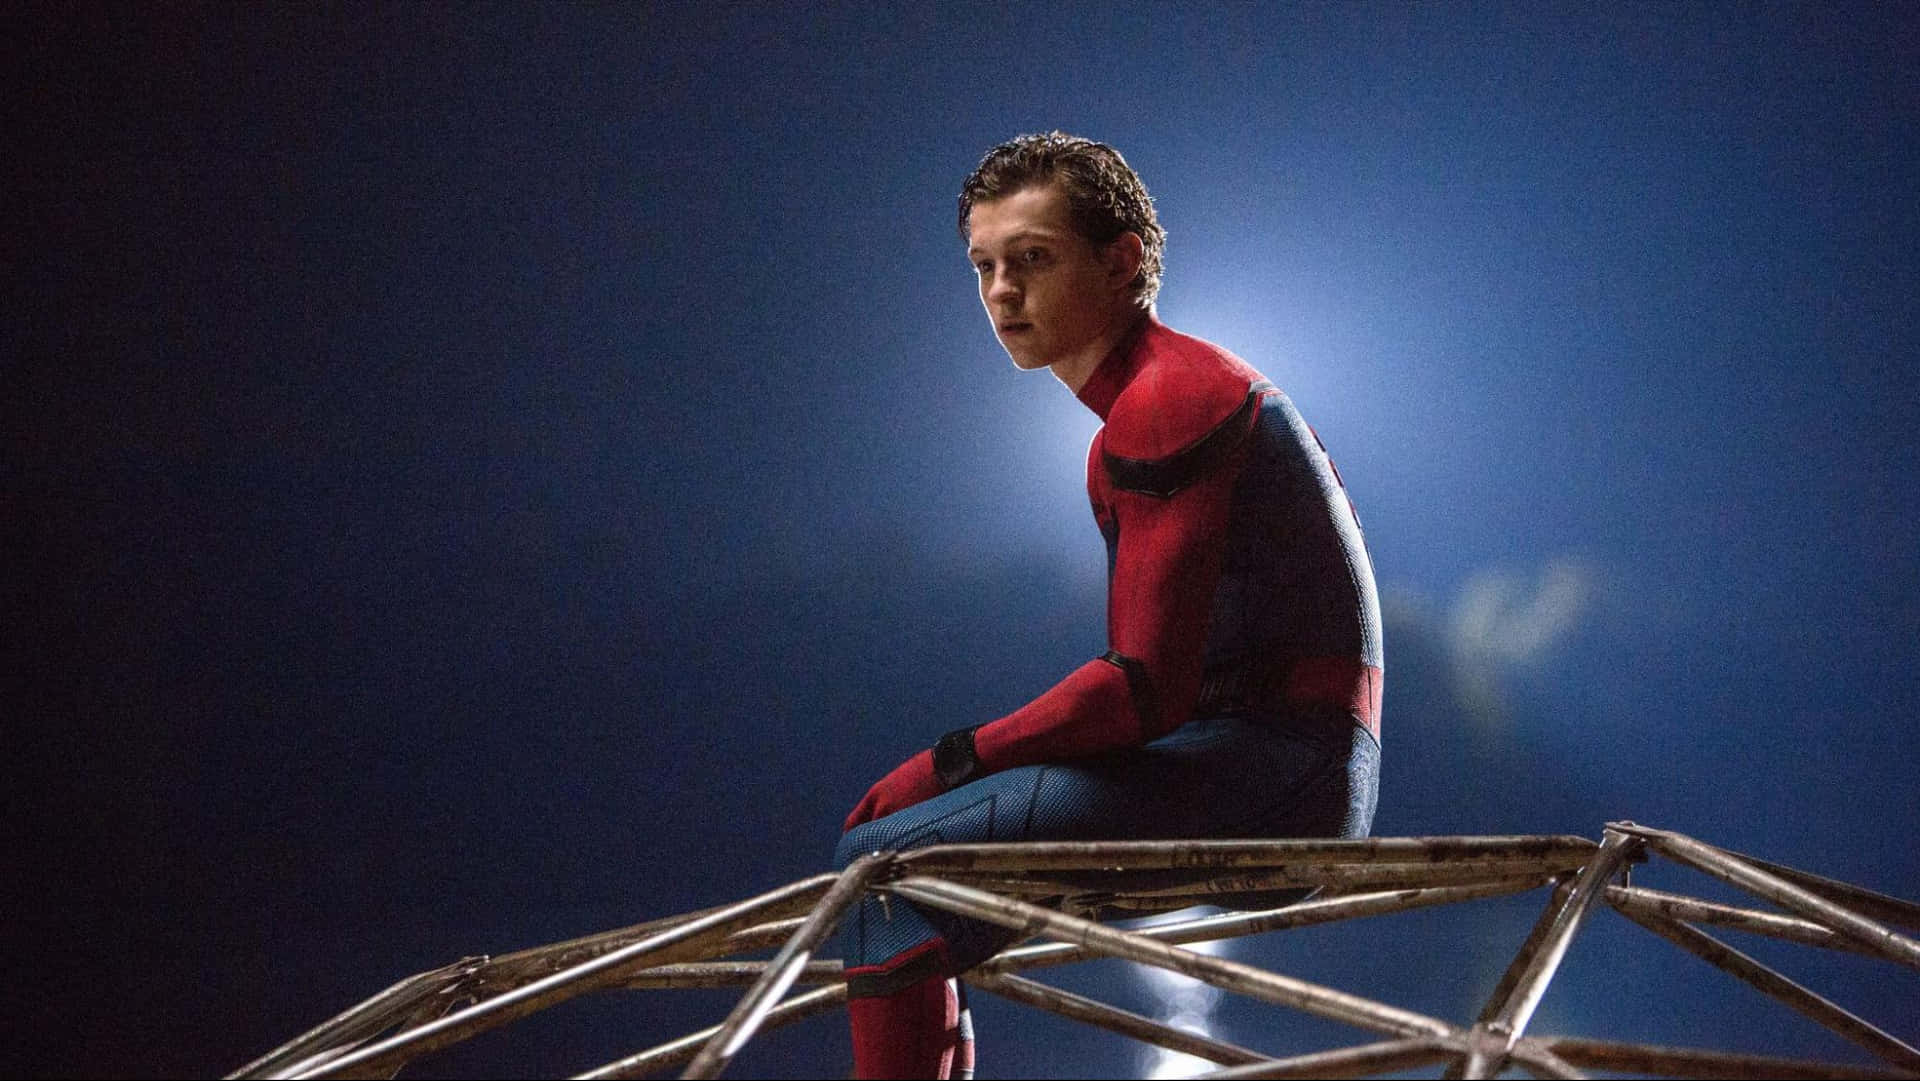 Spider Man Homecoming: Peter Parker flies into action Wallpaper